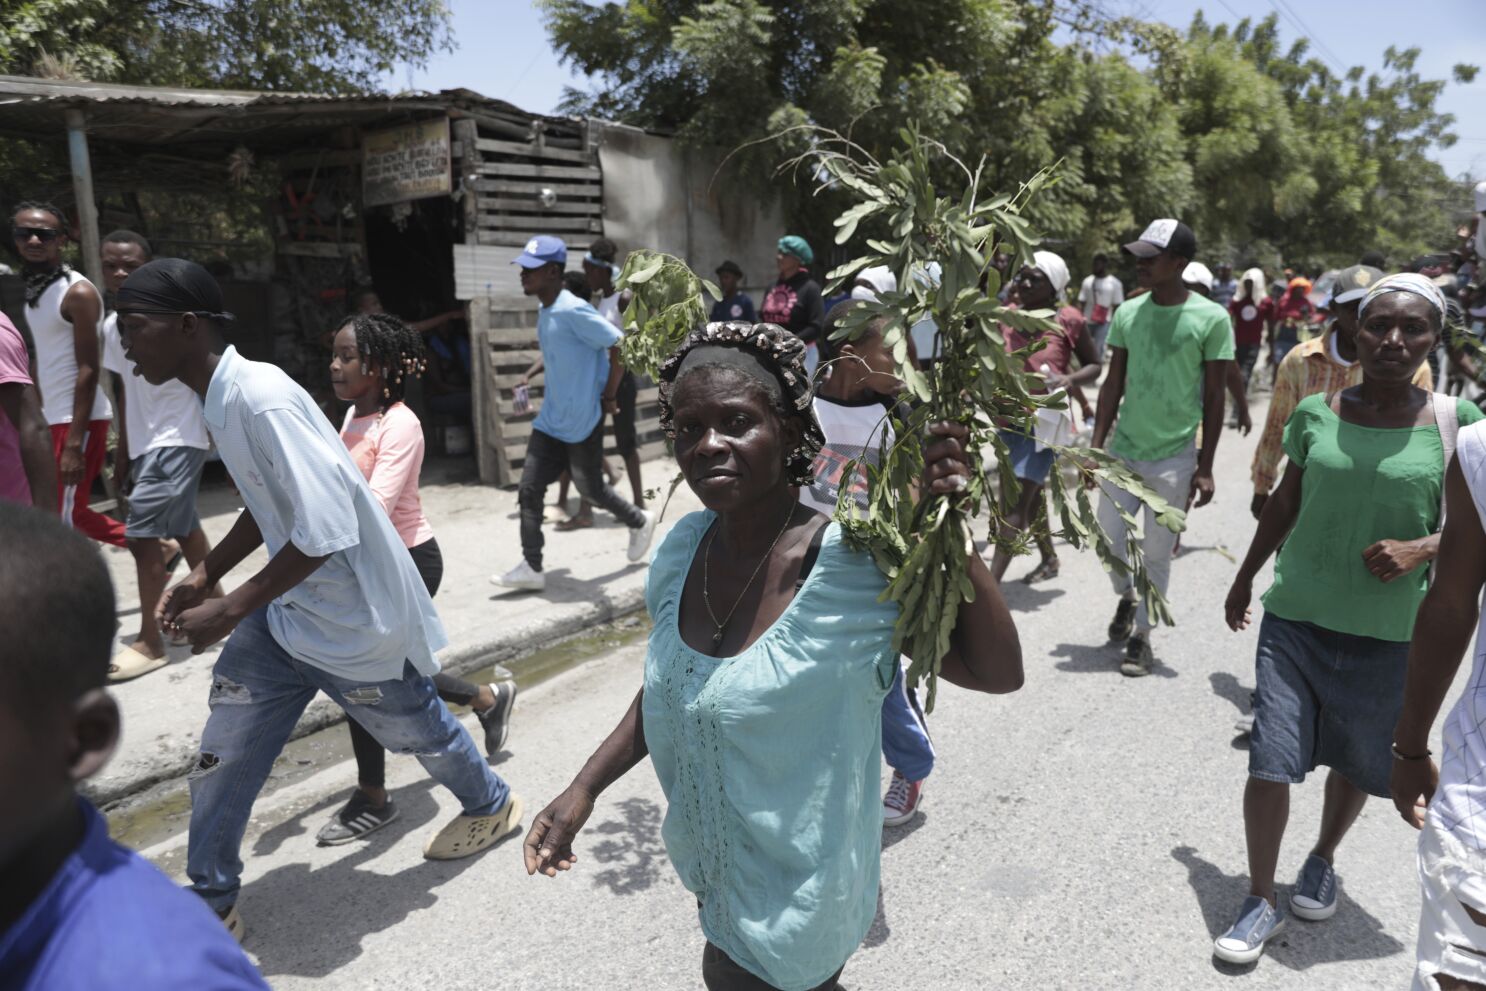 Efforts to help Haitians suffer new blow with kidnapping of American nurse  and daughter - Los Angeles Times